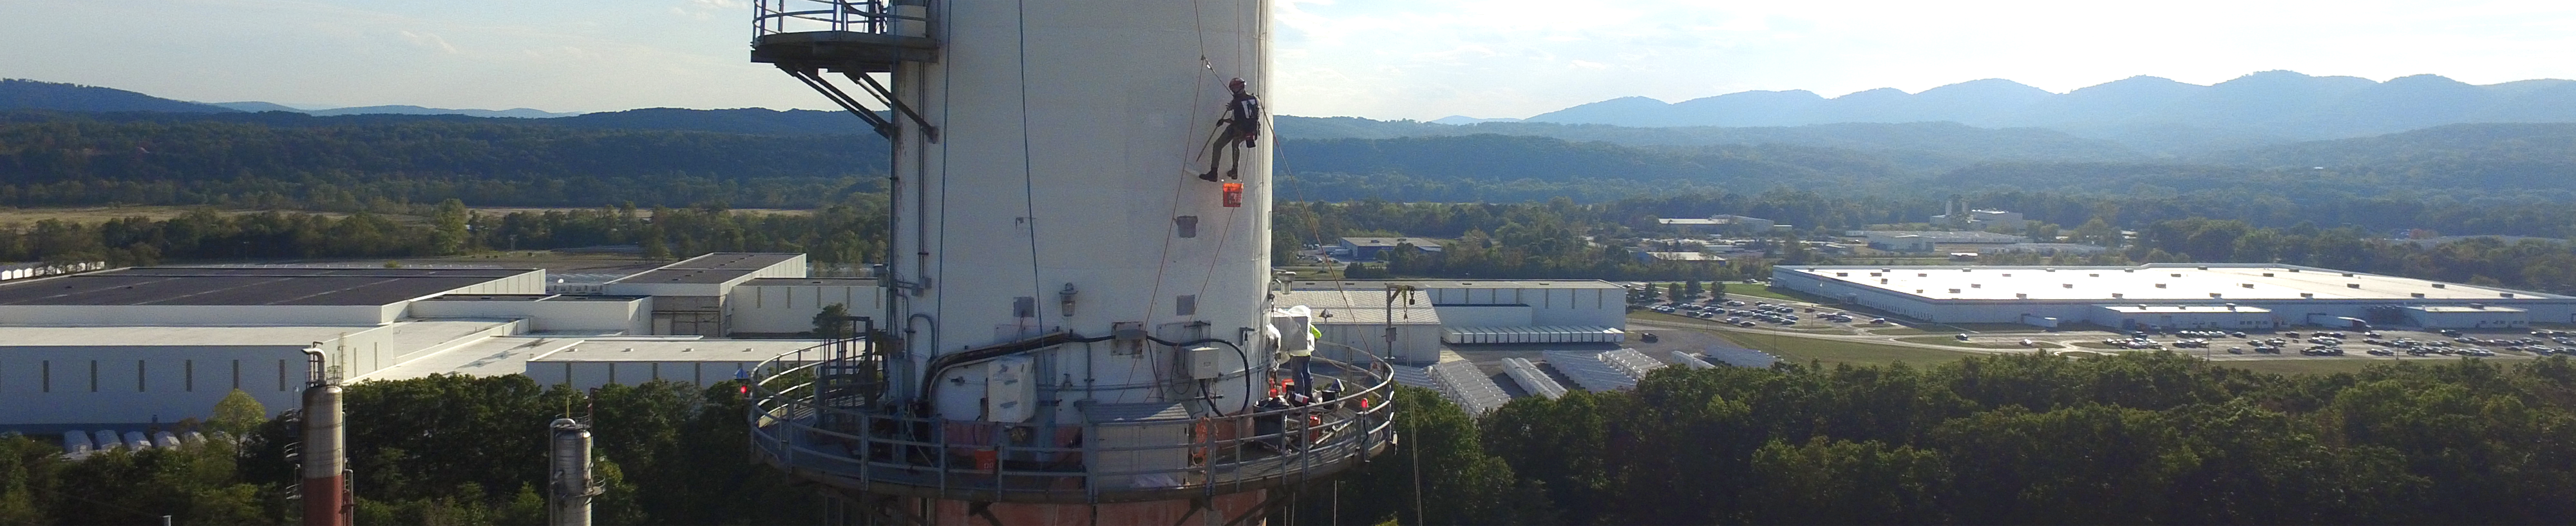 crew using swing stage access approach in order to paint Industrial chimney at height